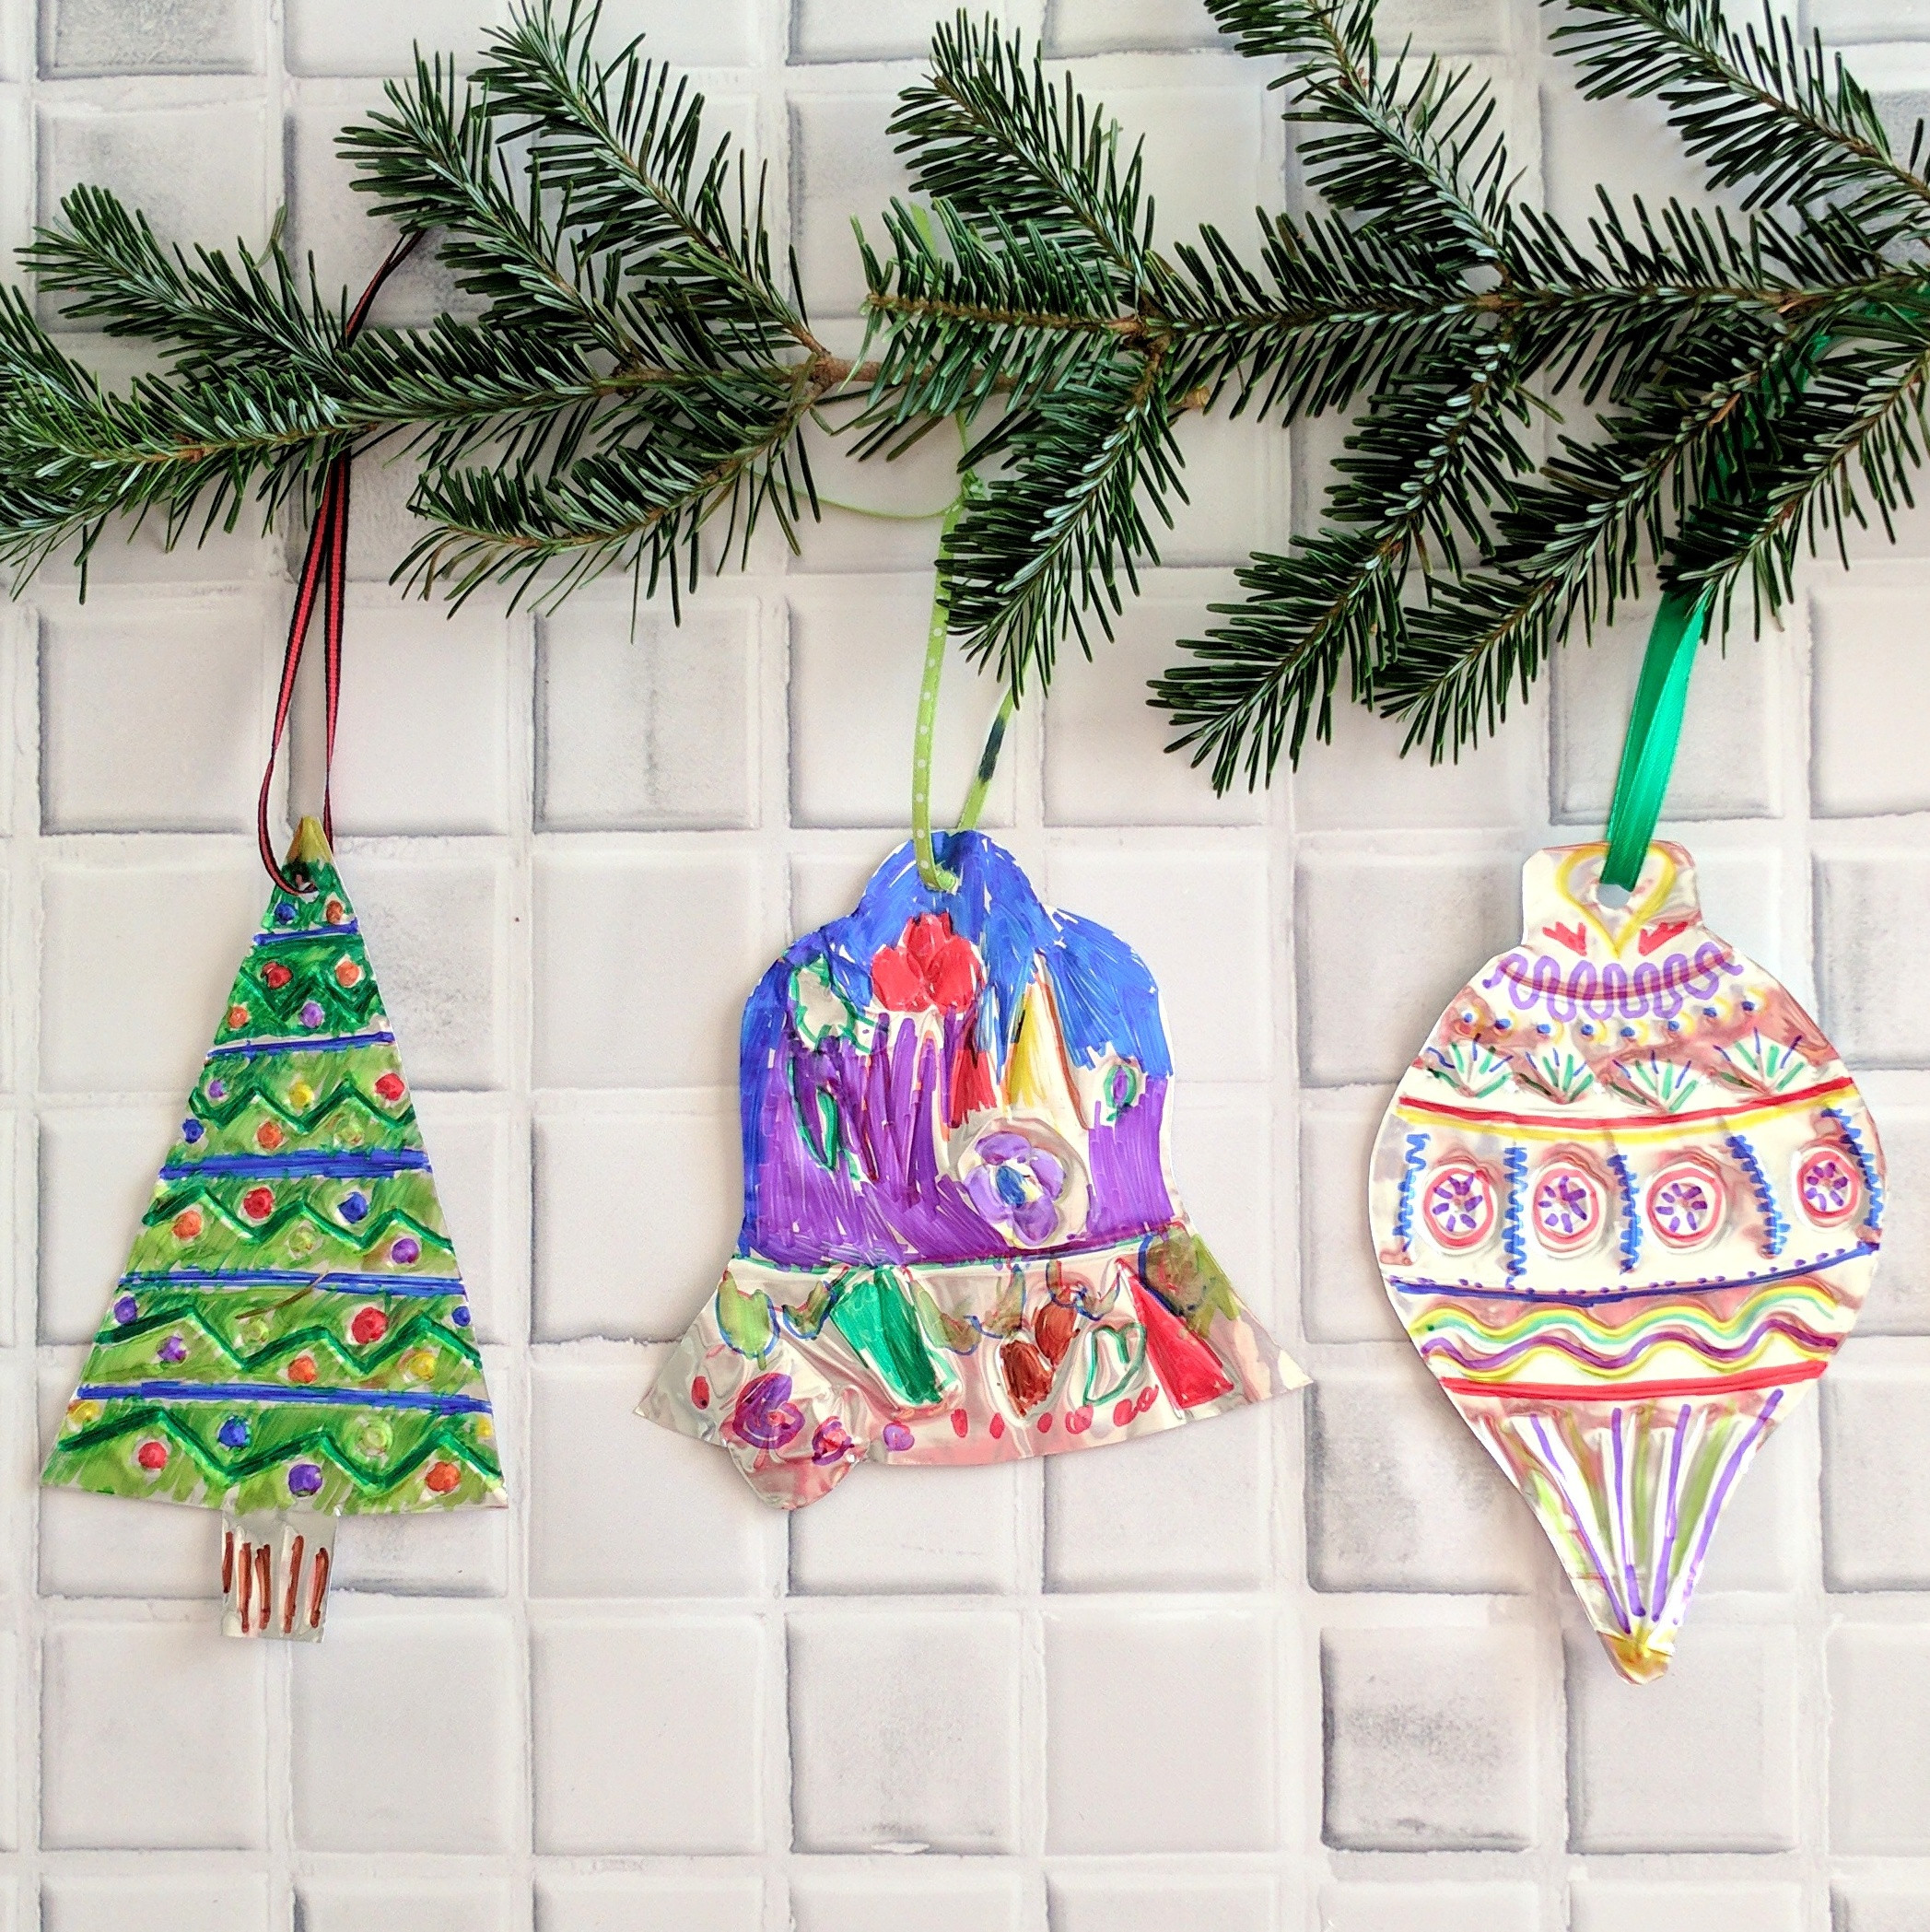 Holiday Crafts For Kids- Christmas Ornaments
 Christmas Ornaments Christmas Crafts for Kids Reality